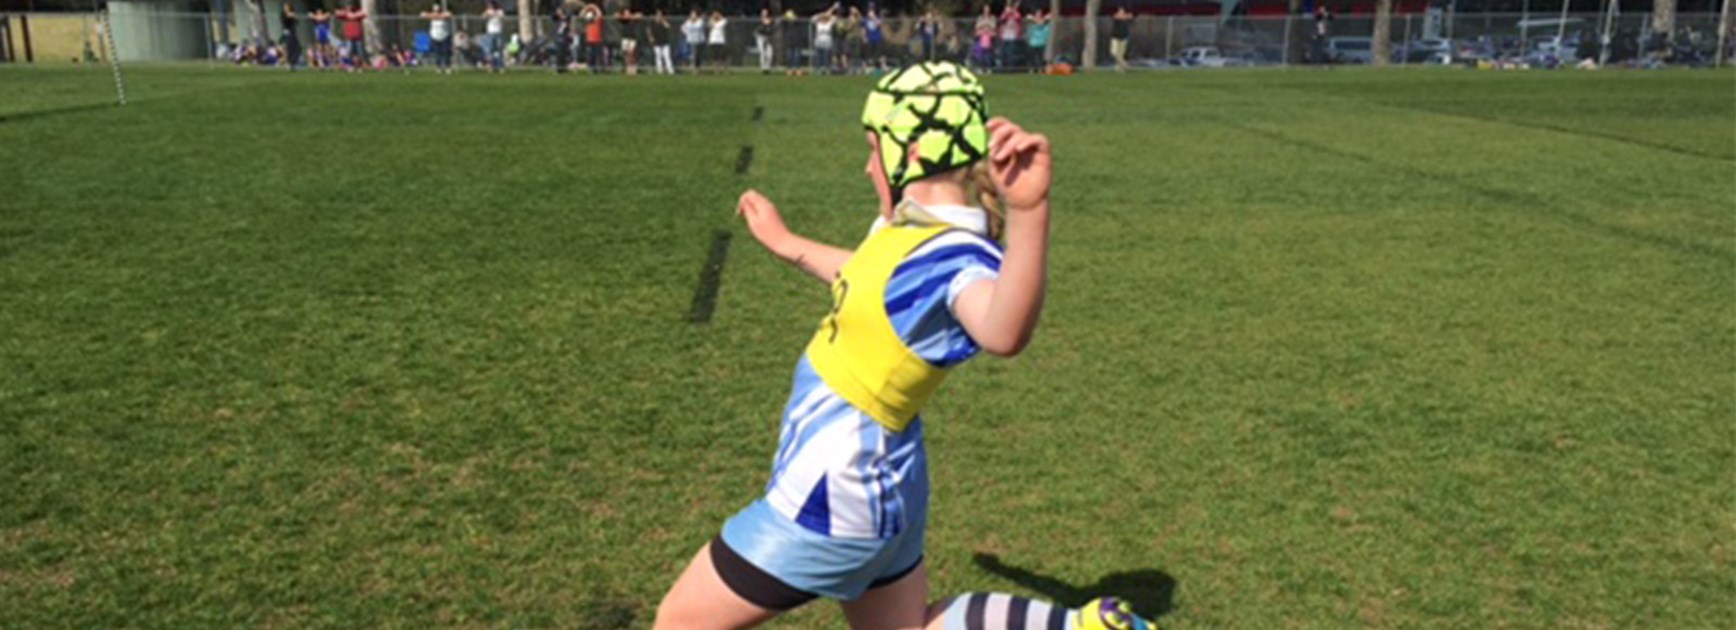 Girls competed in the annual NRL Legends Shield for the first time on Thursday.